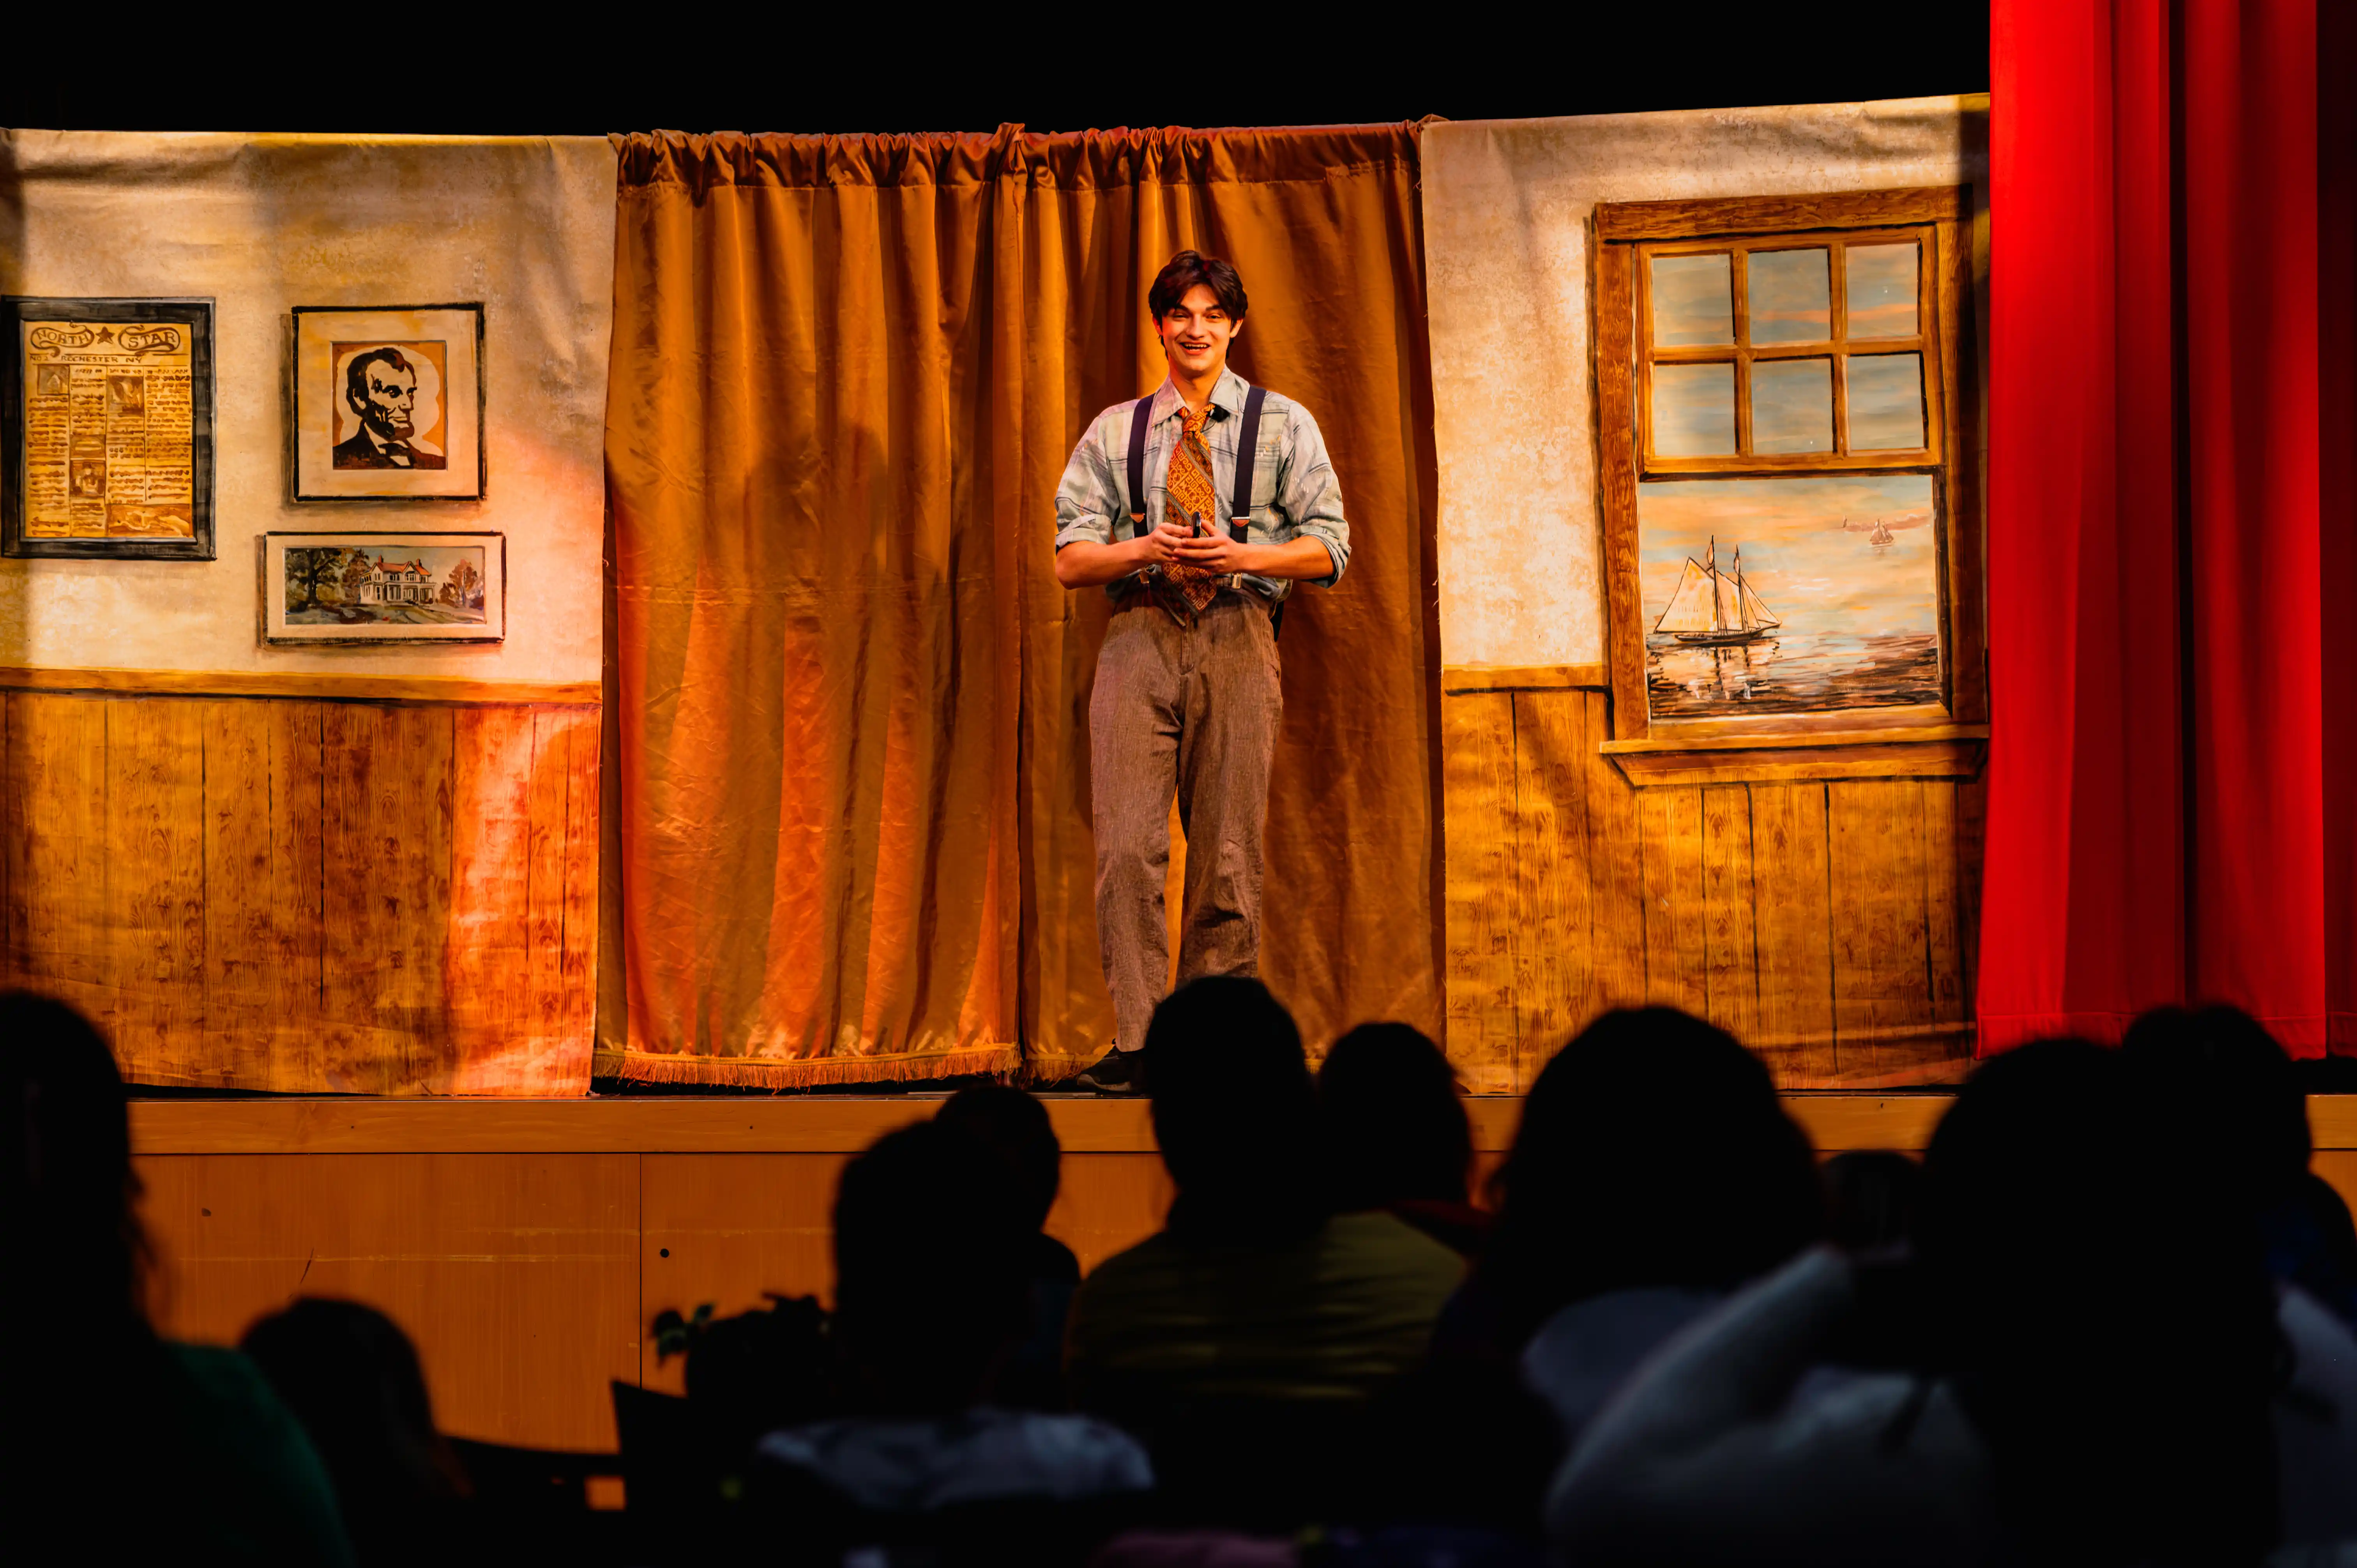 Actor on stage performing in front of an audience with a rustic set design in the background.